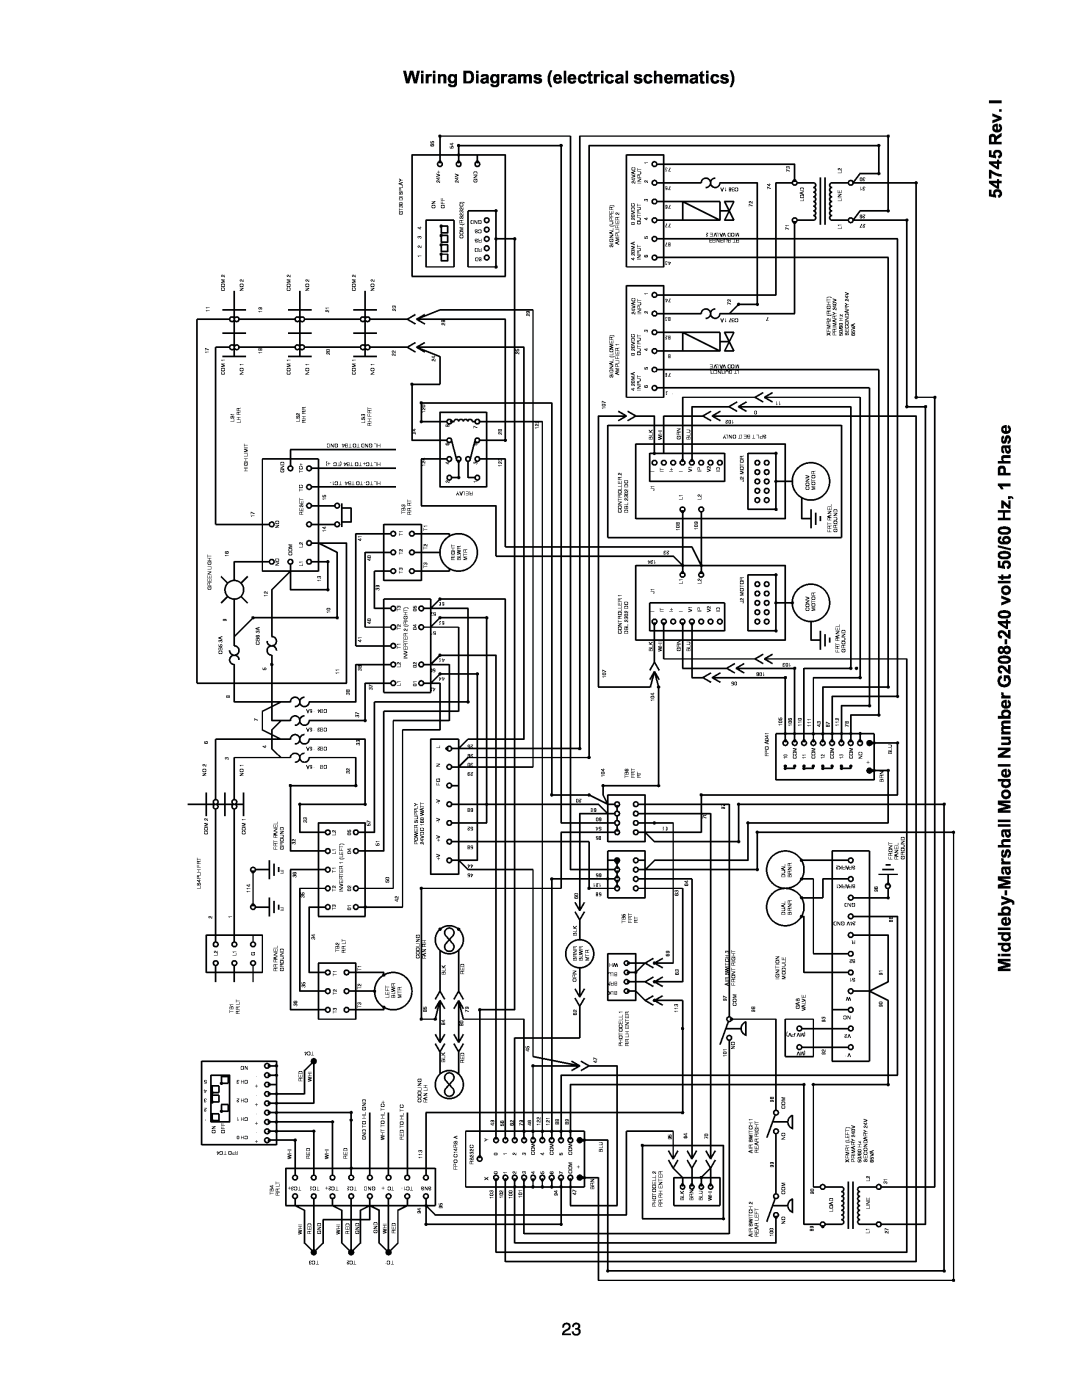 Middleby Marshall PS770G GAS installation manual schematics, 54745 Rev, Wiring Diagrams electrical 